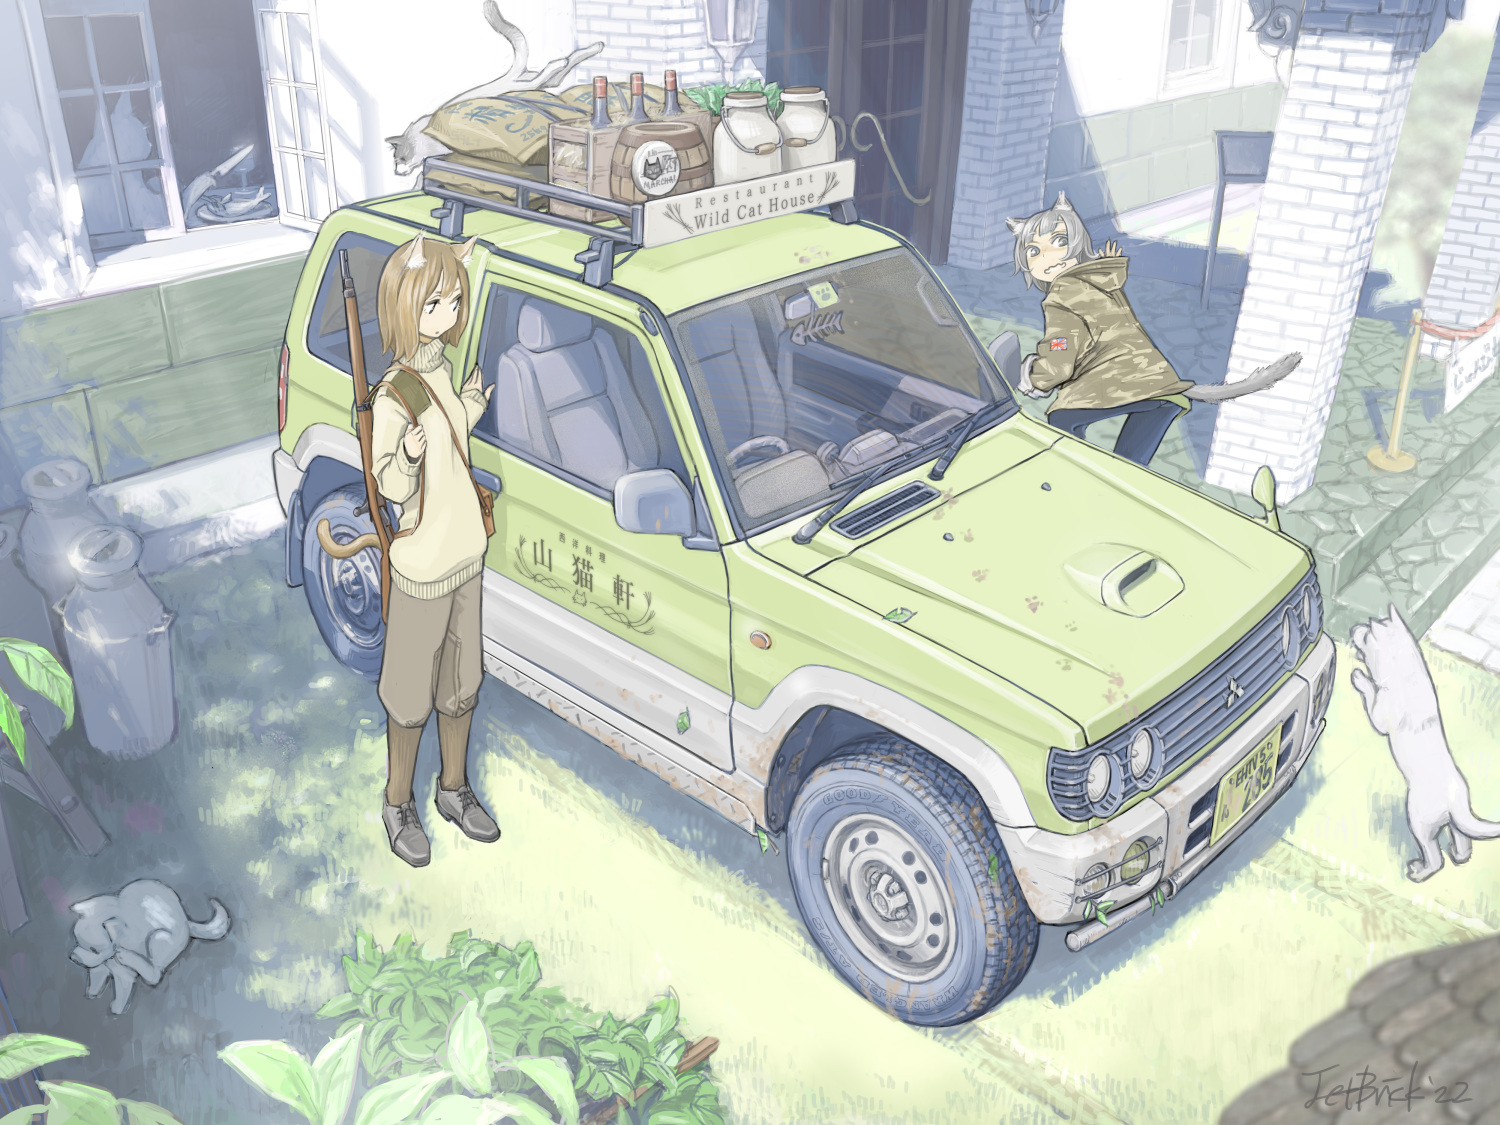 A certain restuarant's shopping car by ジェットブリック